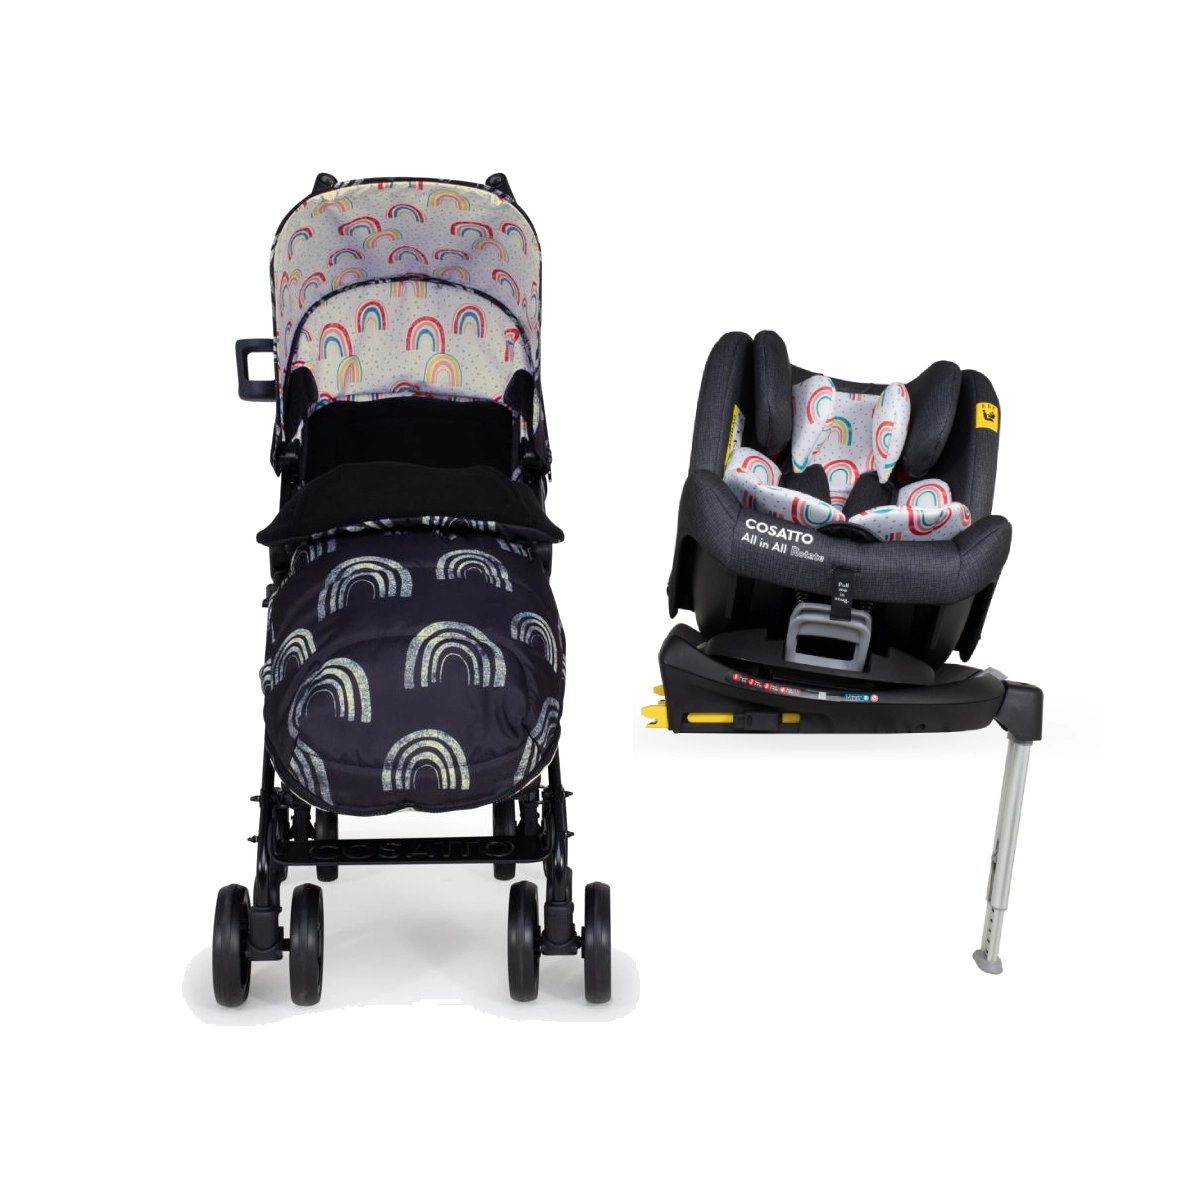 Cosatto Supa 3 Stroller & All in All Rotate Car Seat Bundle